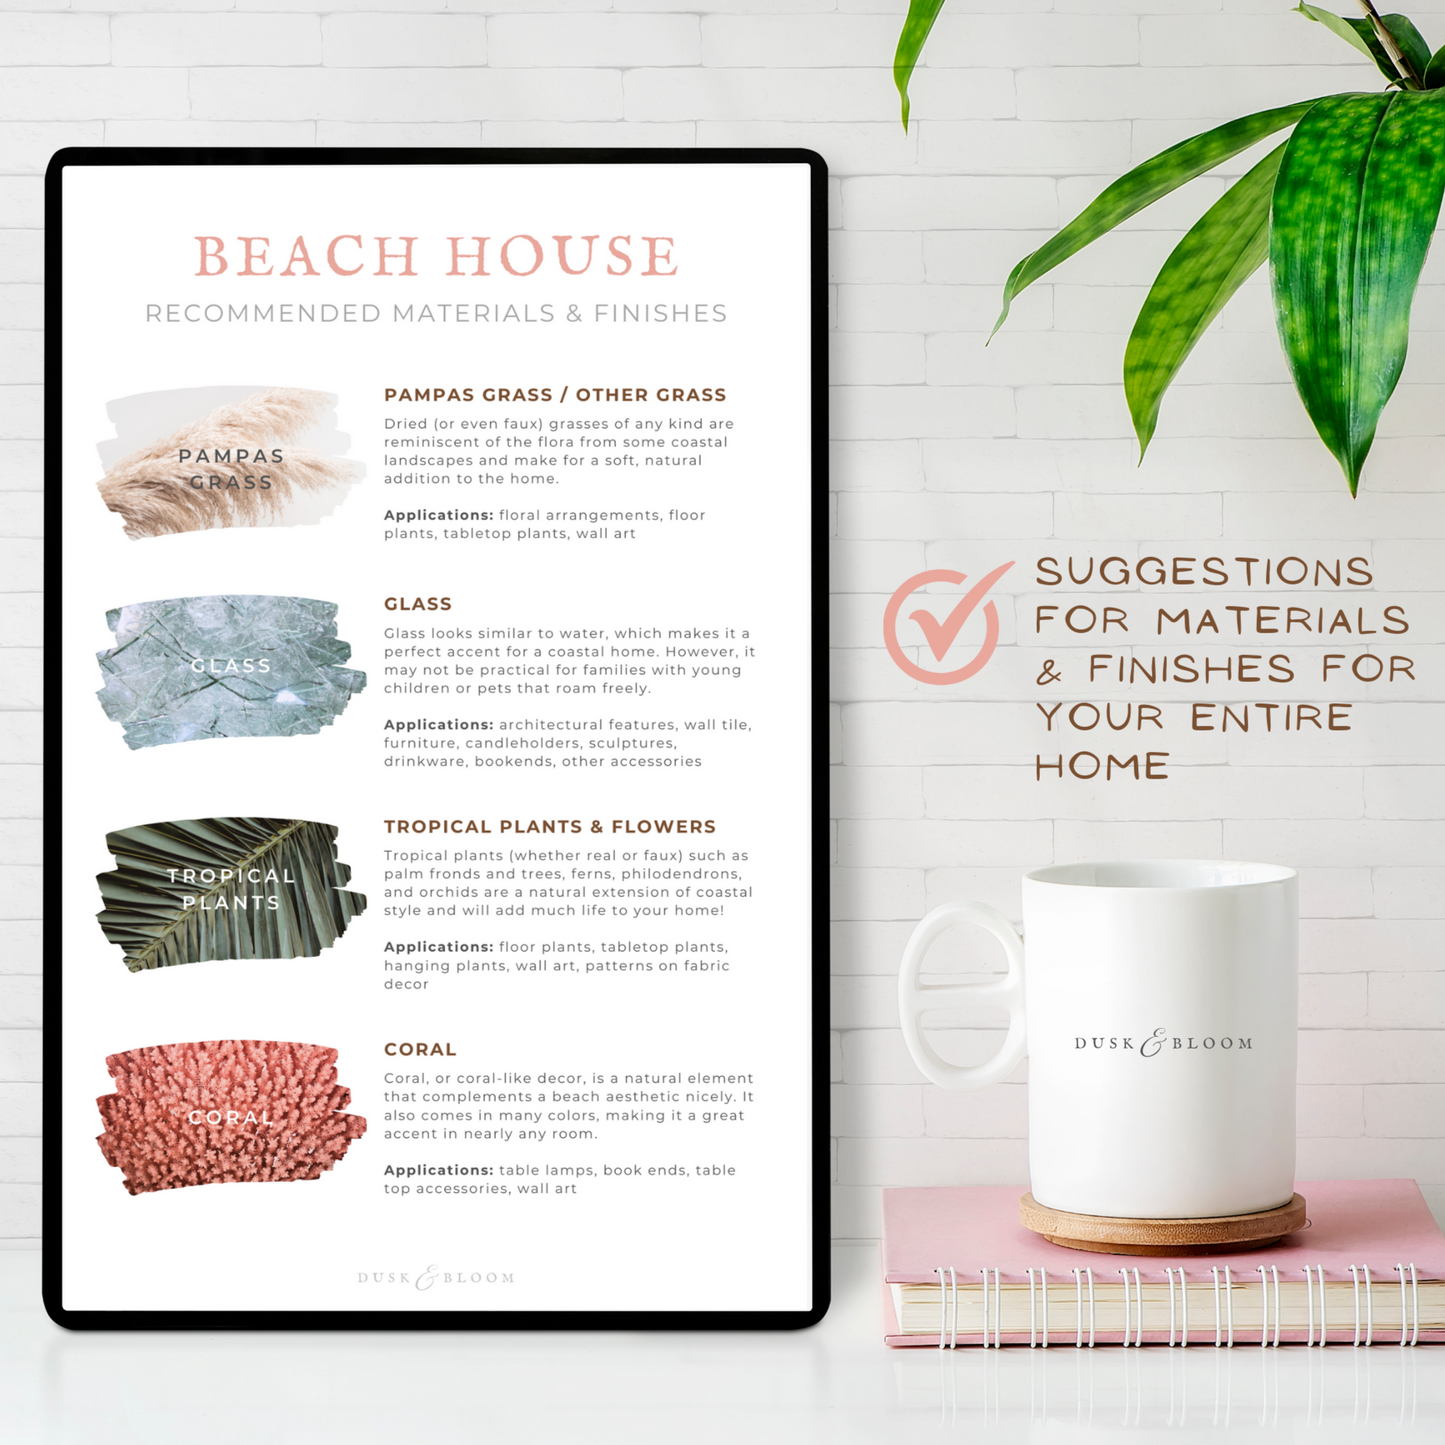 Beach House Paint Colors - Color Palette for Whole House Interior + Materials & Finishes Guide | Dusk & Bloom